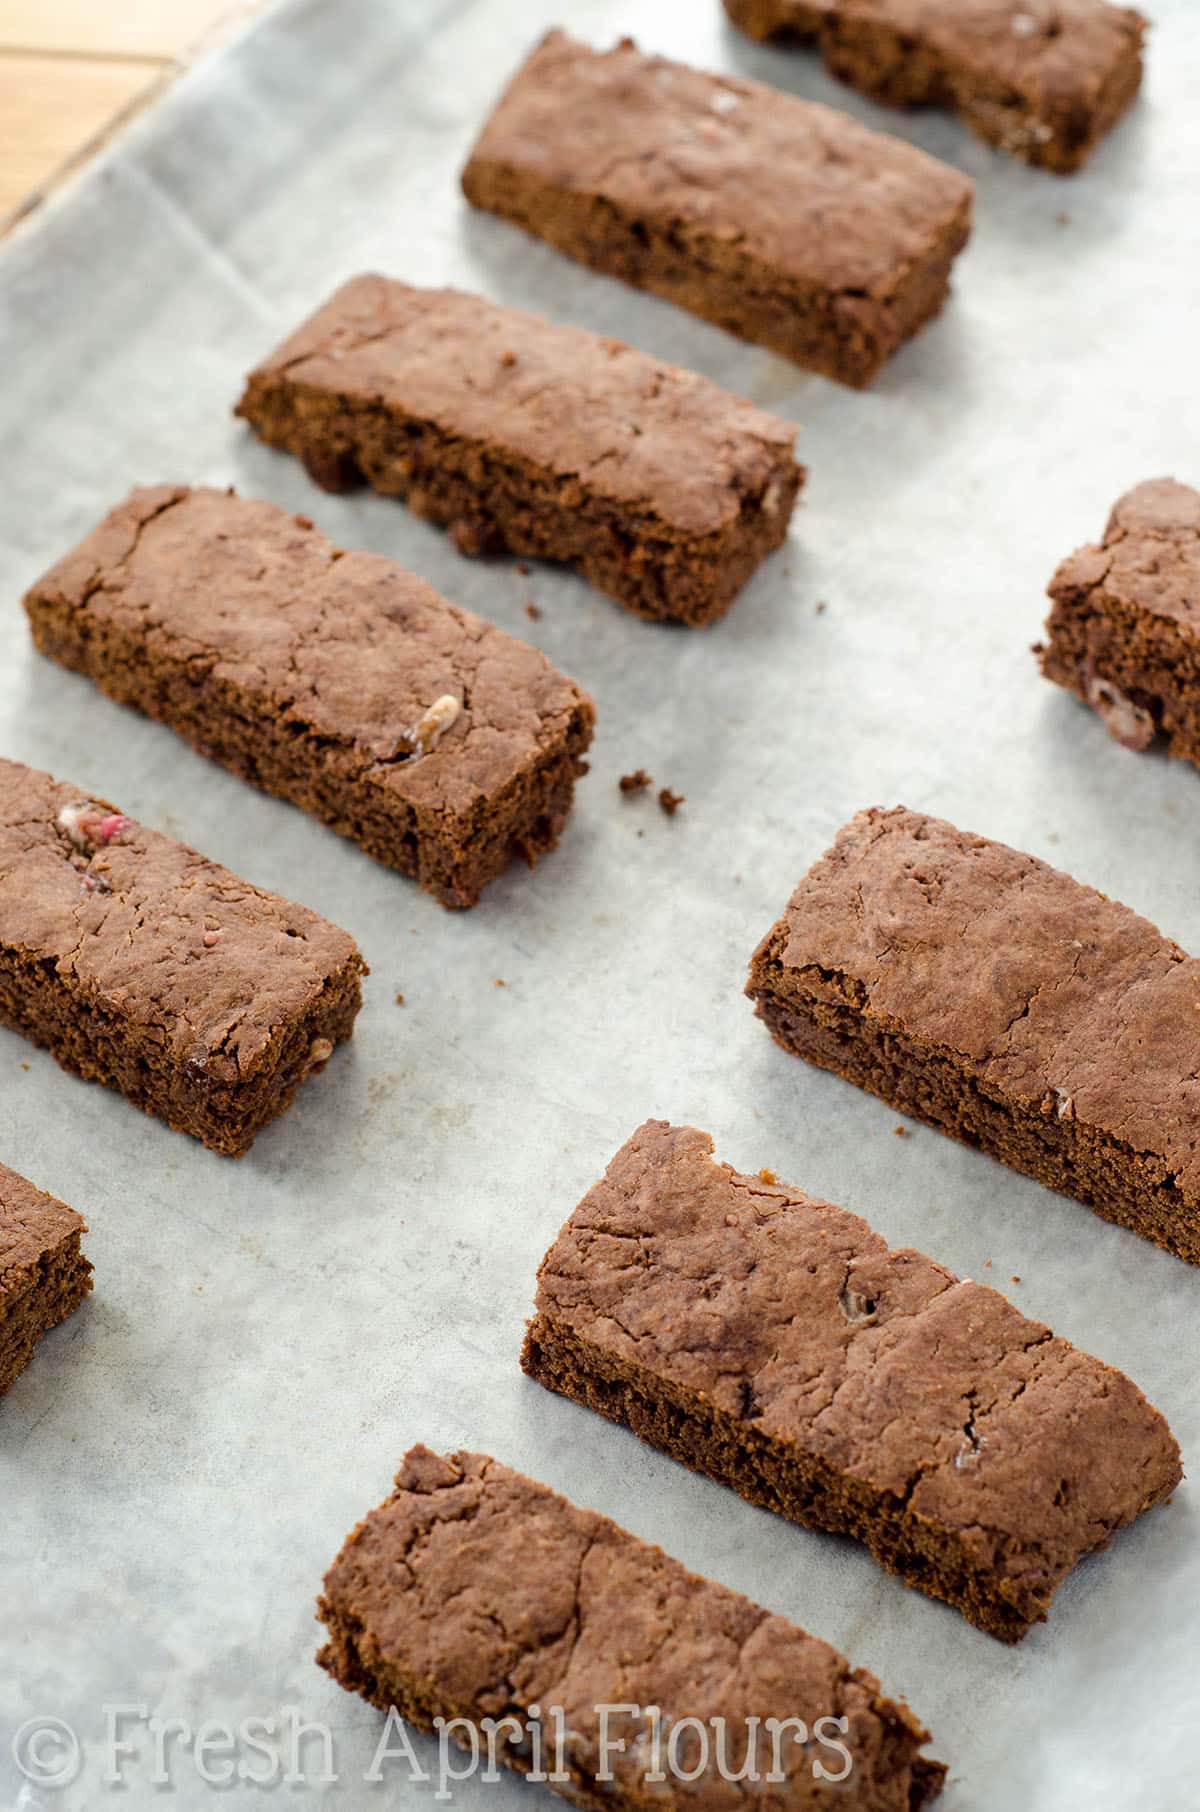 Baked chocolate peppermint biscotti on a baking sheet lined with parchment paper.